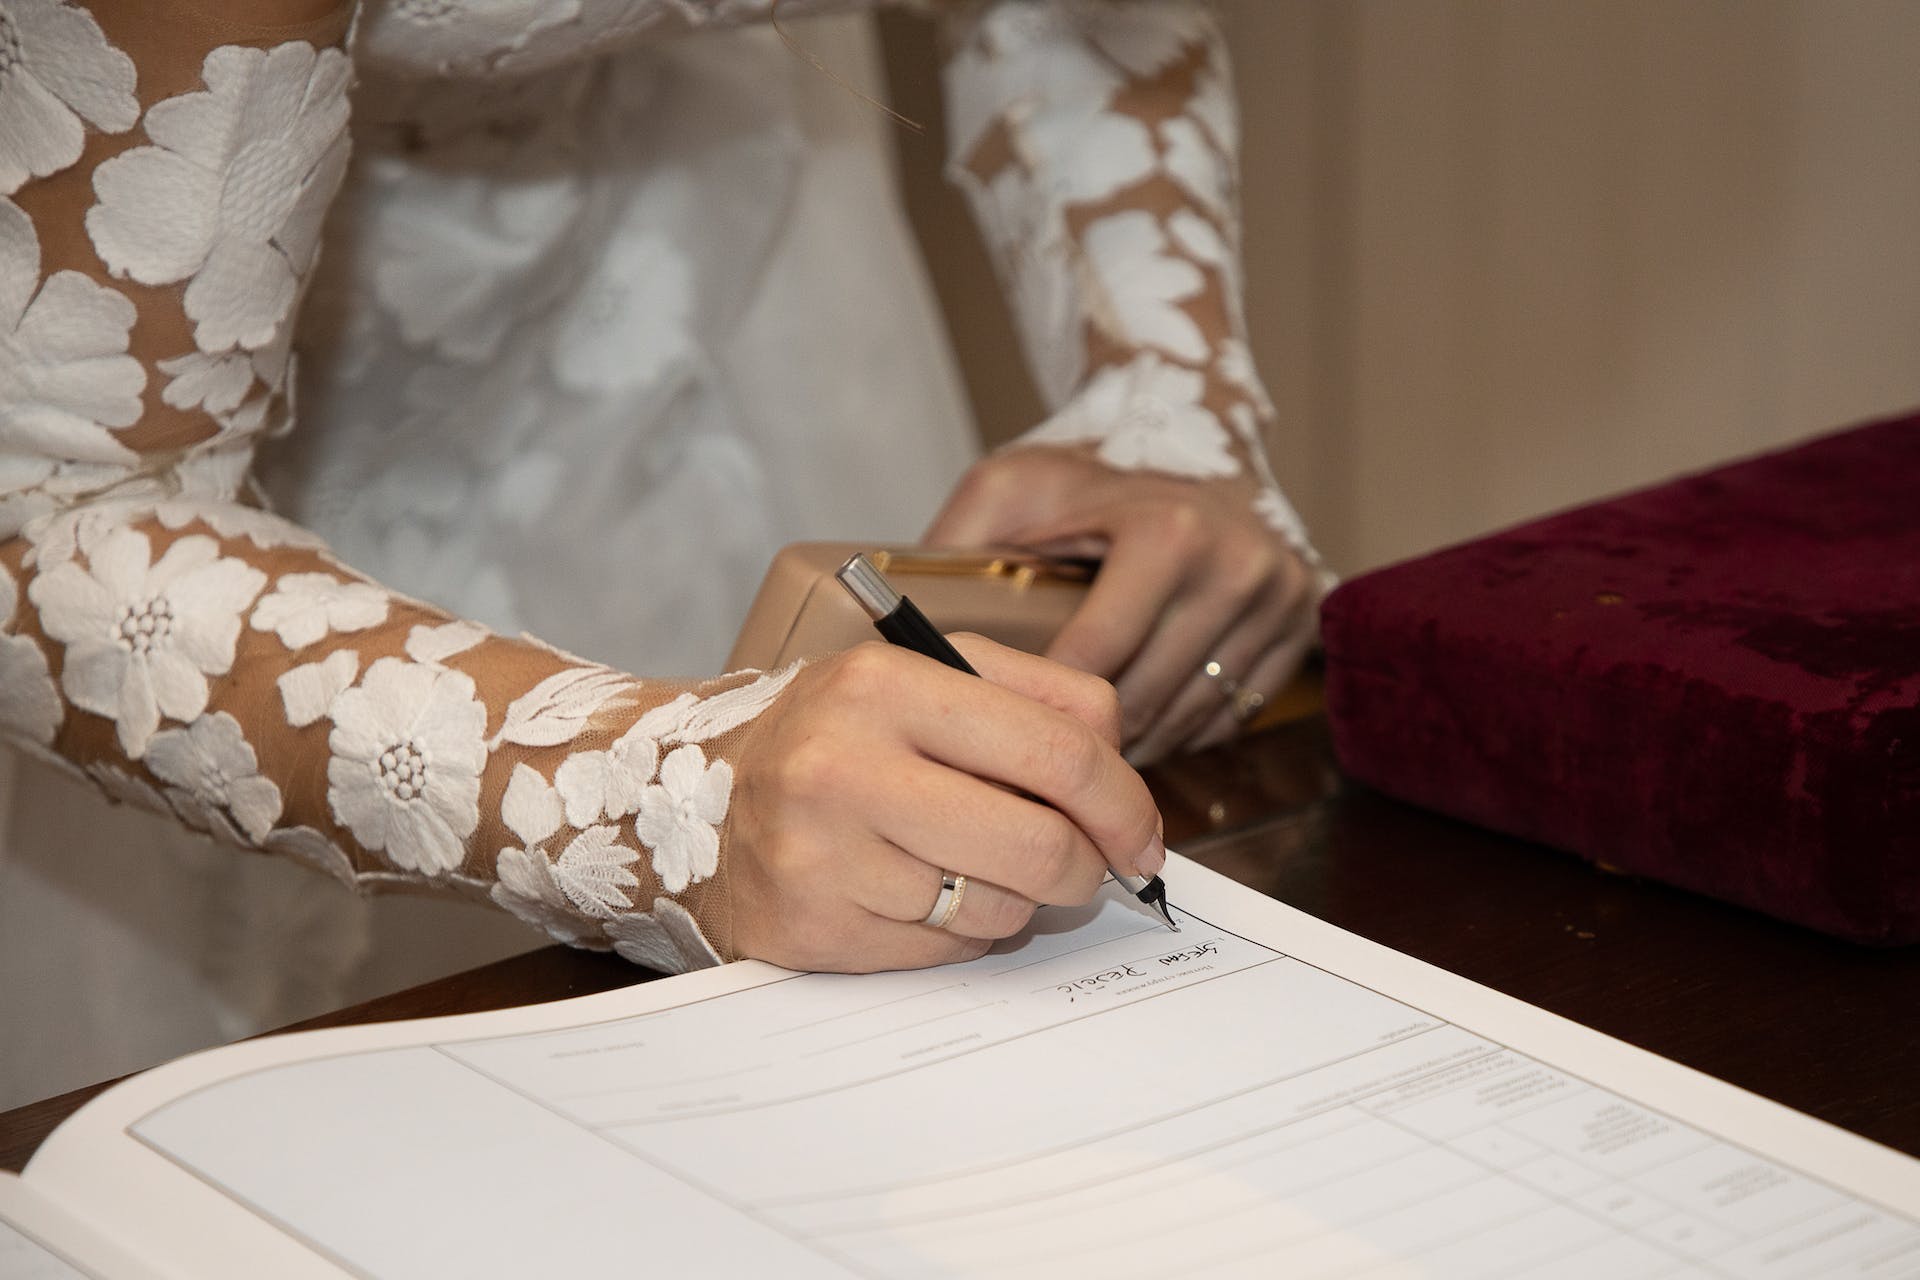 A bride signing a document | Source: Pexels